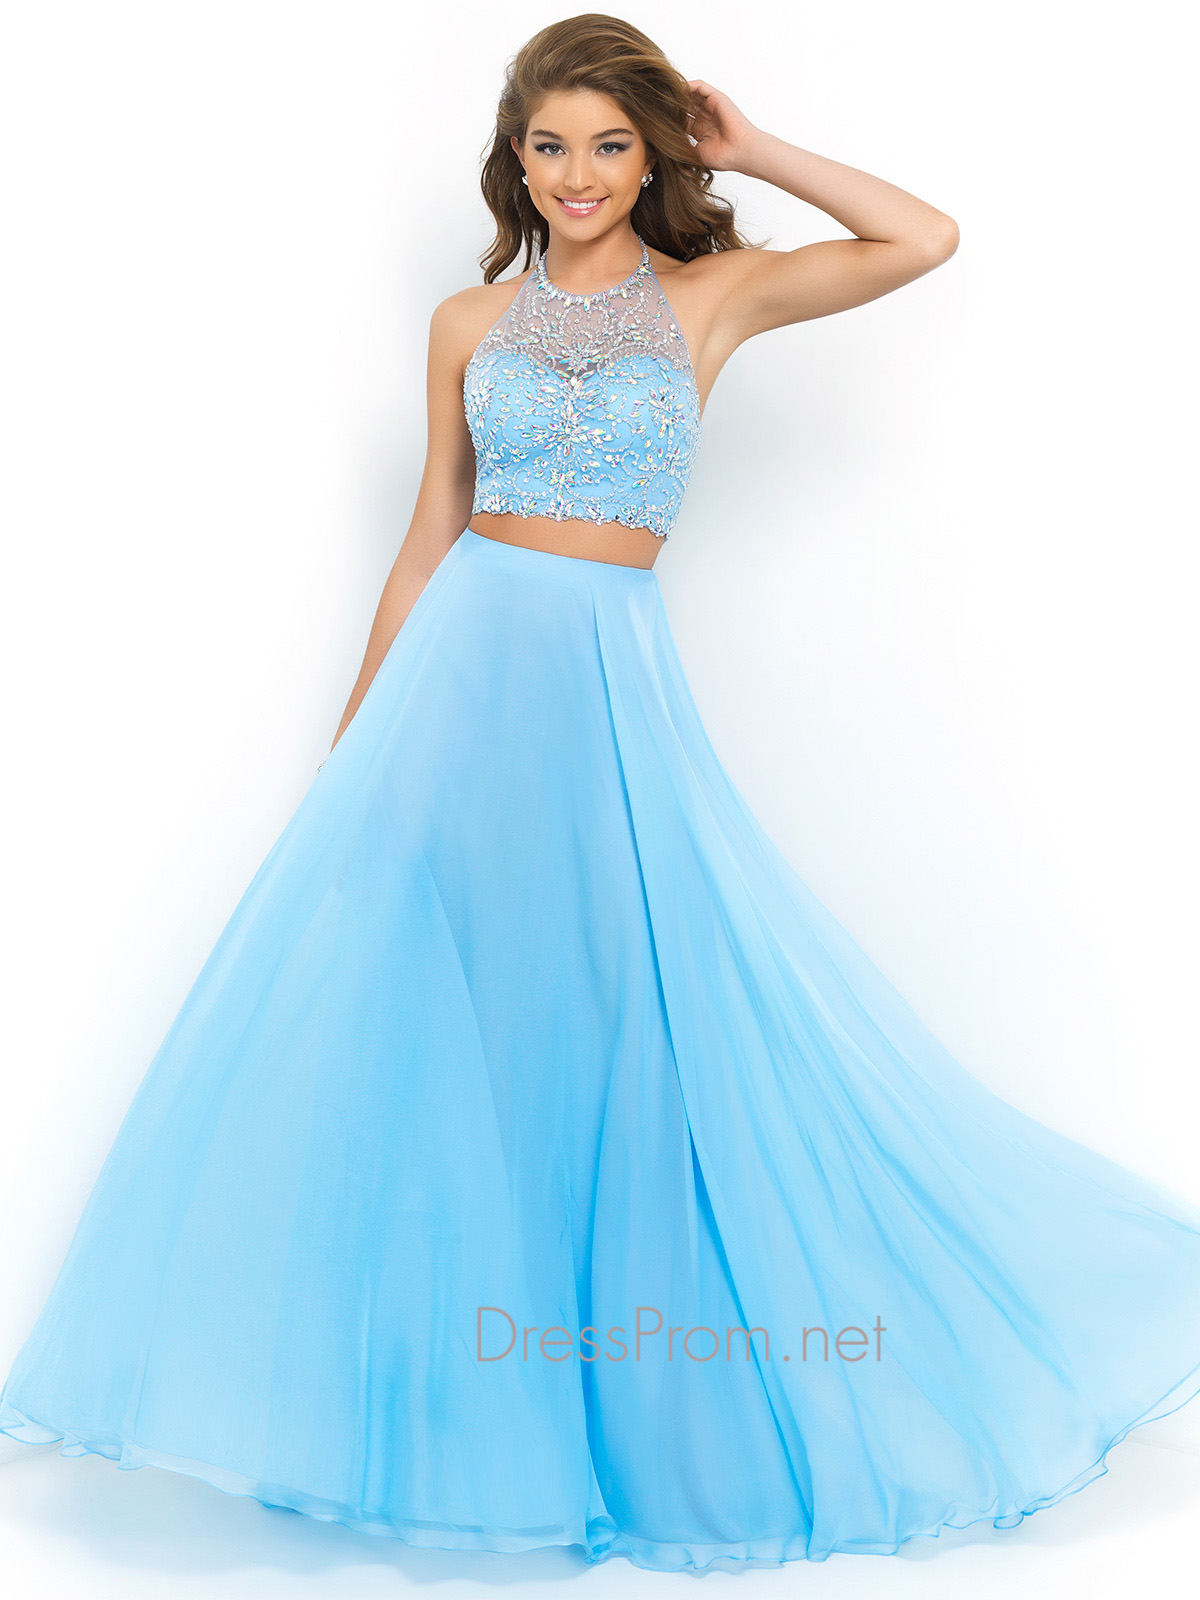 Beautiful Two Piece Prom Dresses & Style 2017-2018